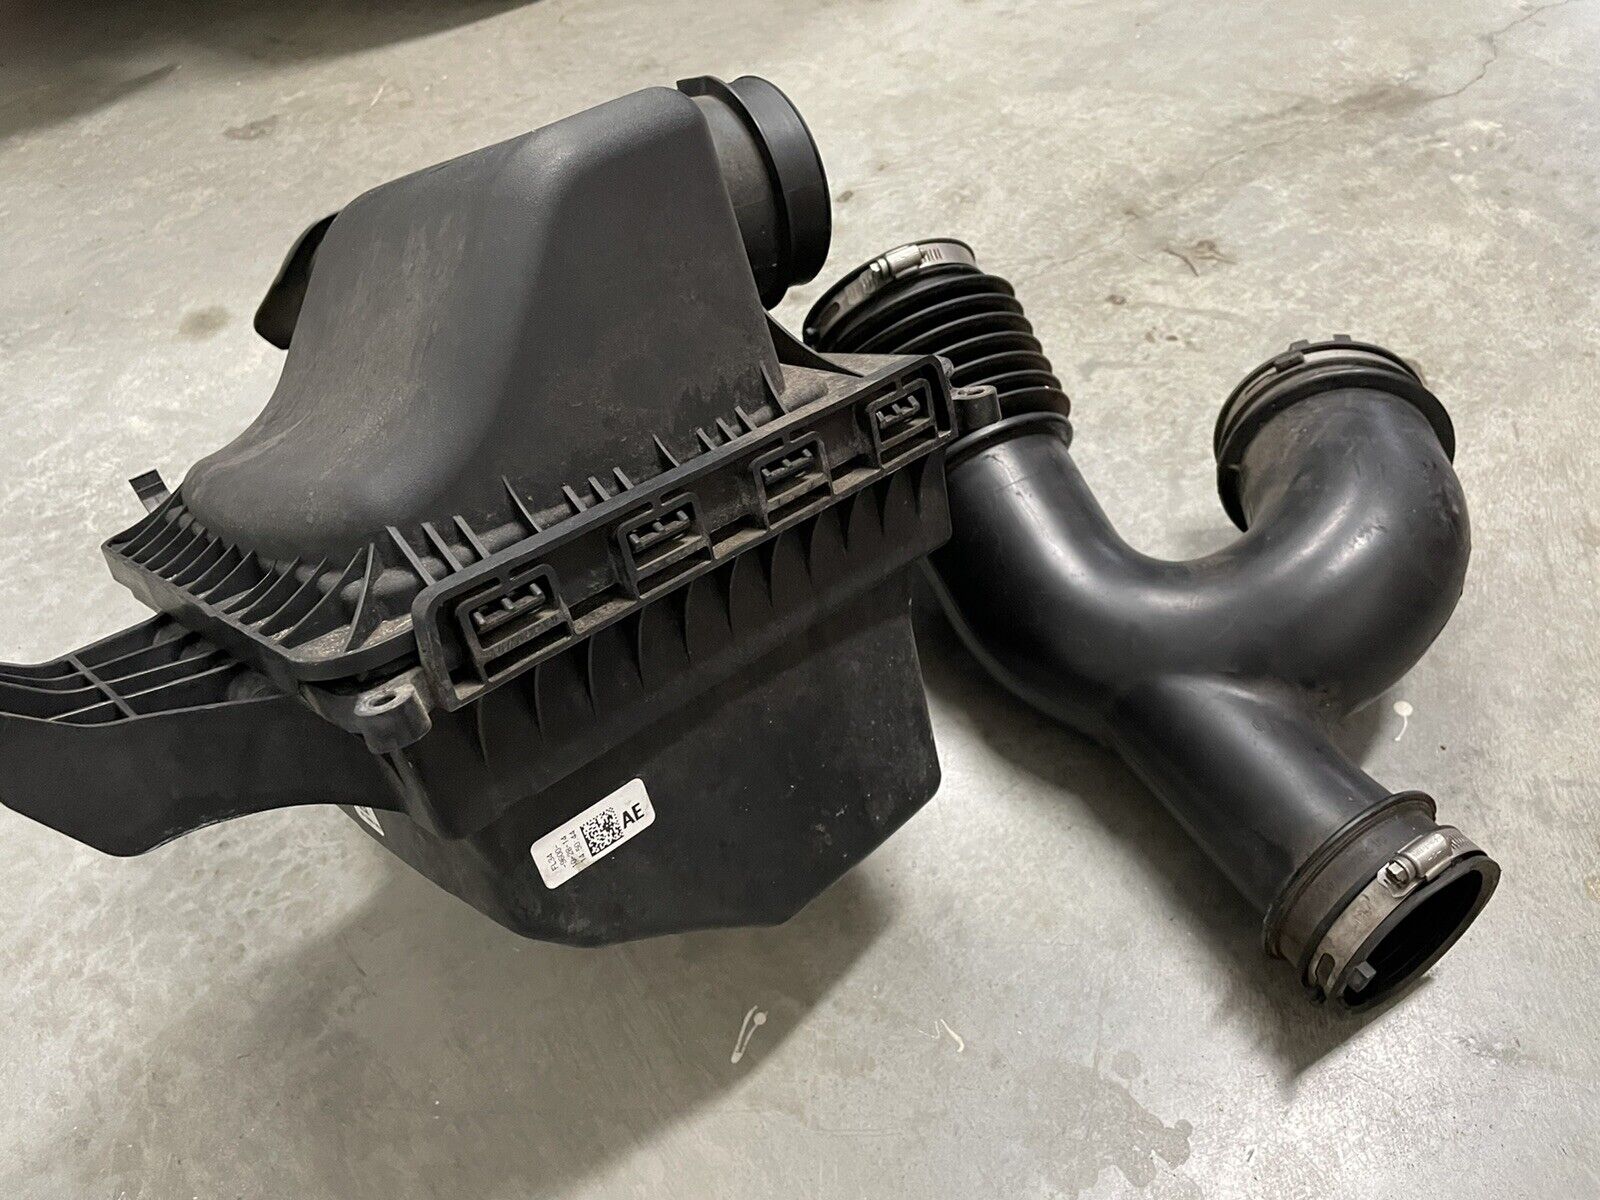 2015 Ford F-150 factory intake tubing